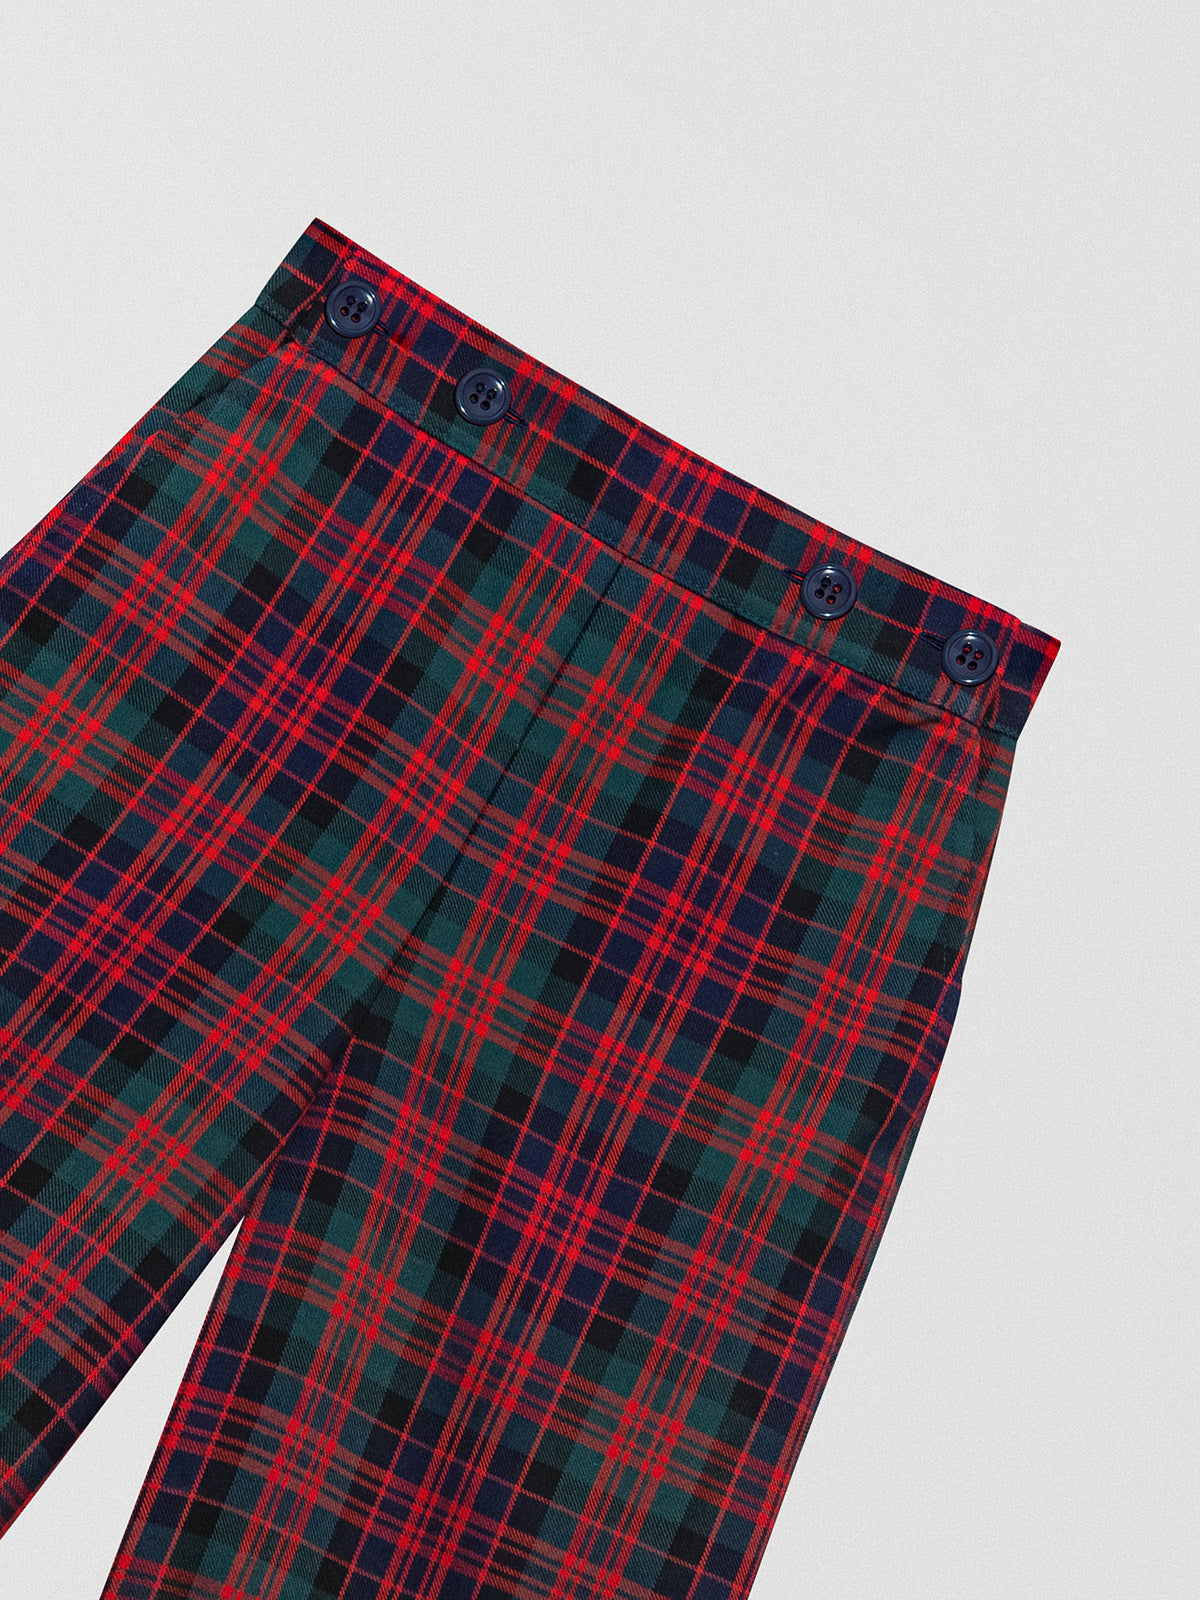 Wool Bermuda shorts with check print in navy, green and red tones.